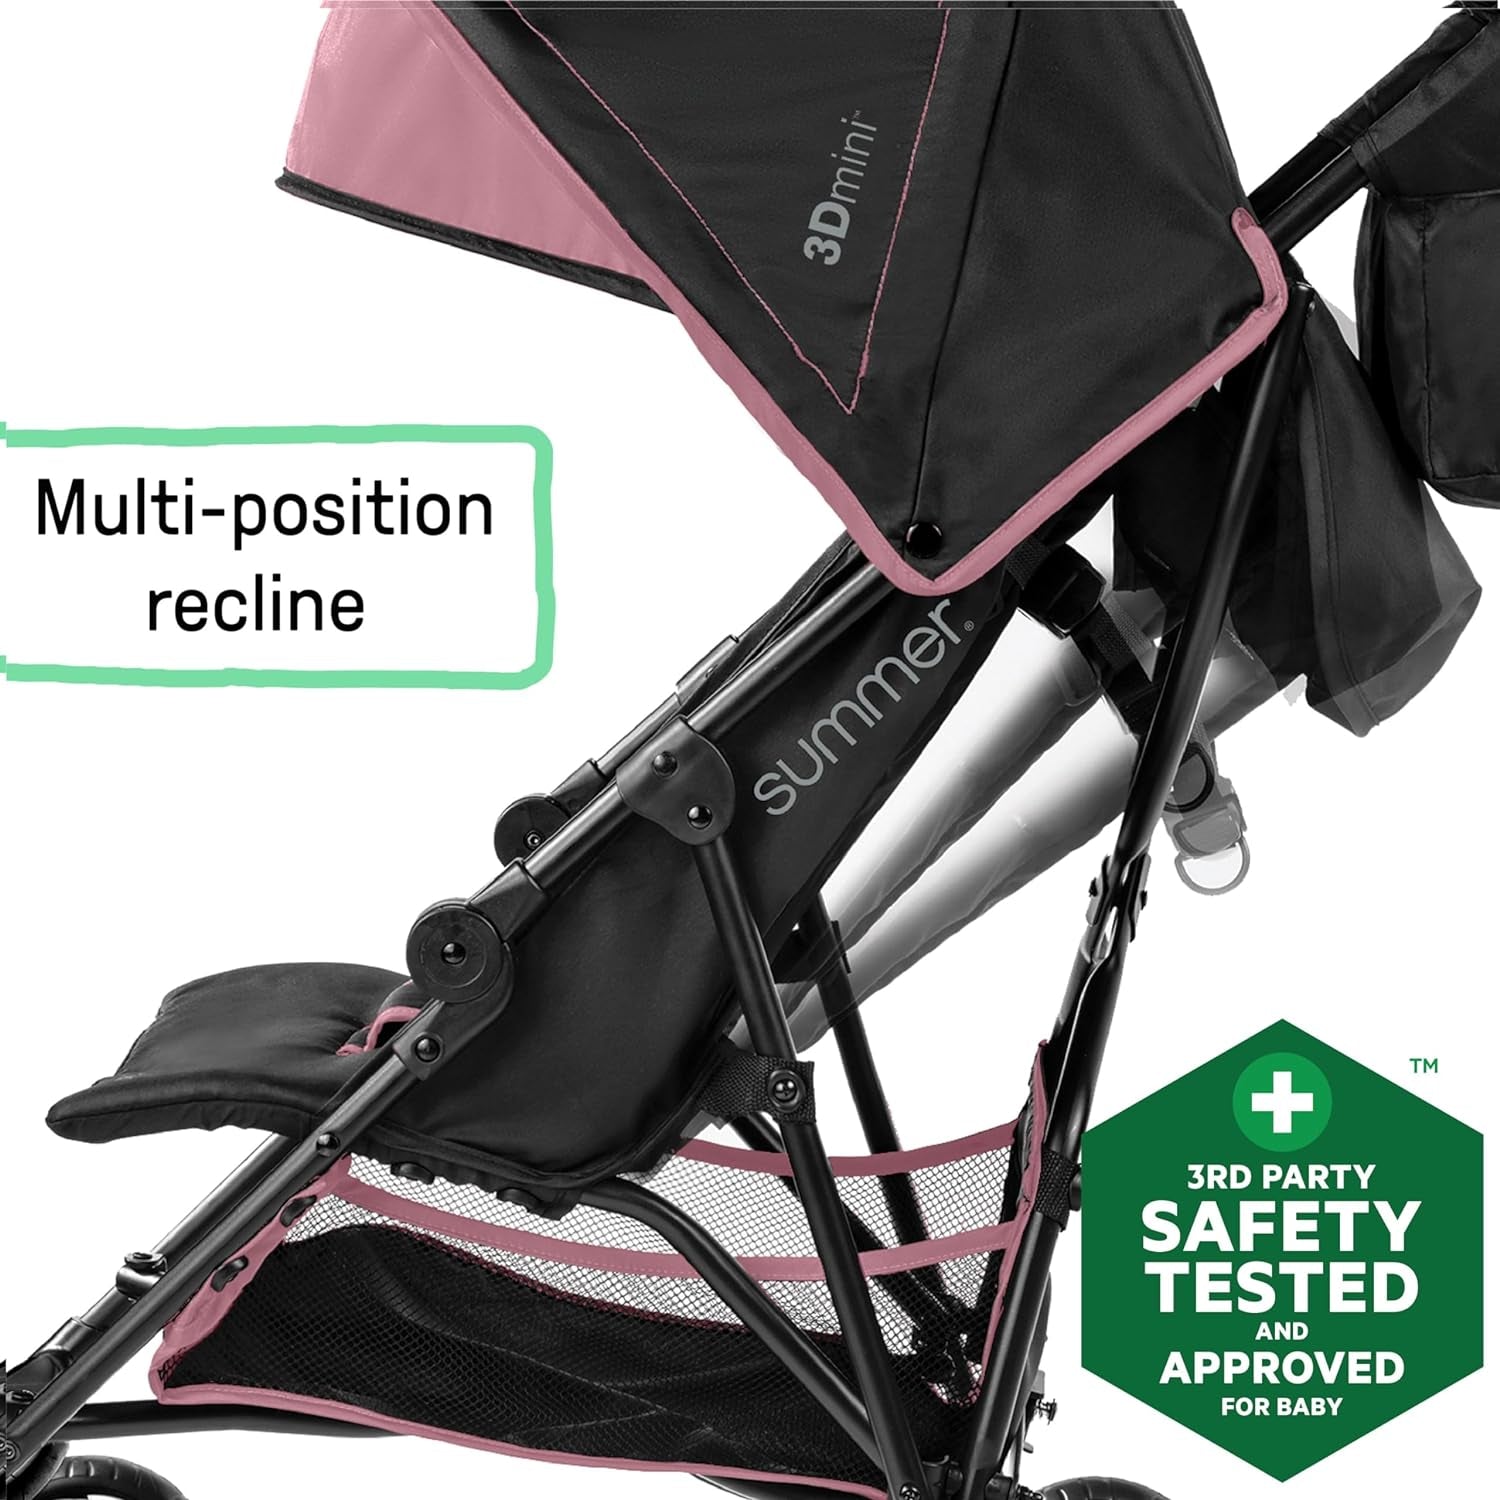 3Dmini Convenience Stroller, Pink – Lightweight Stroller with Compact Fold, Multi-Position Recline, Canopy with Pop Out Sun Visor and More – Umbrella Stroller for Travel